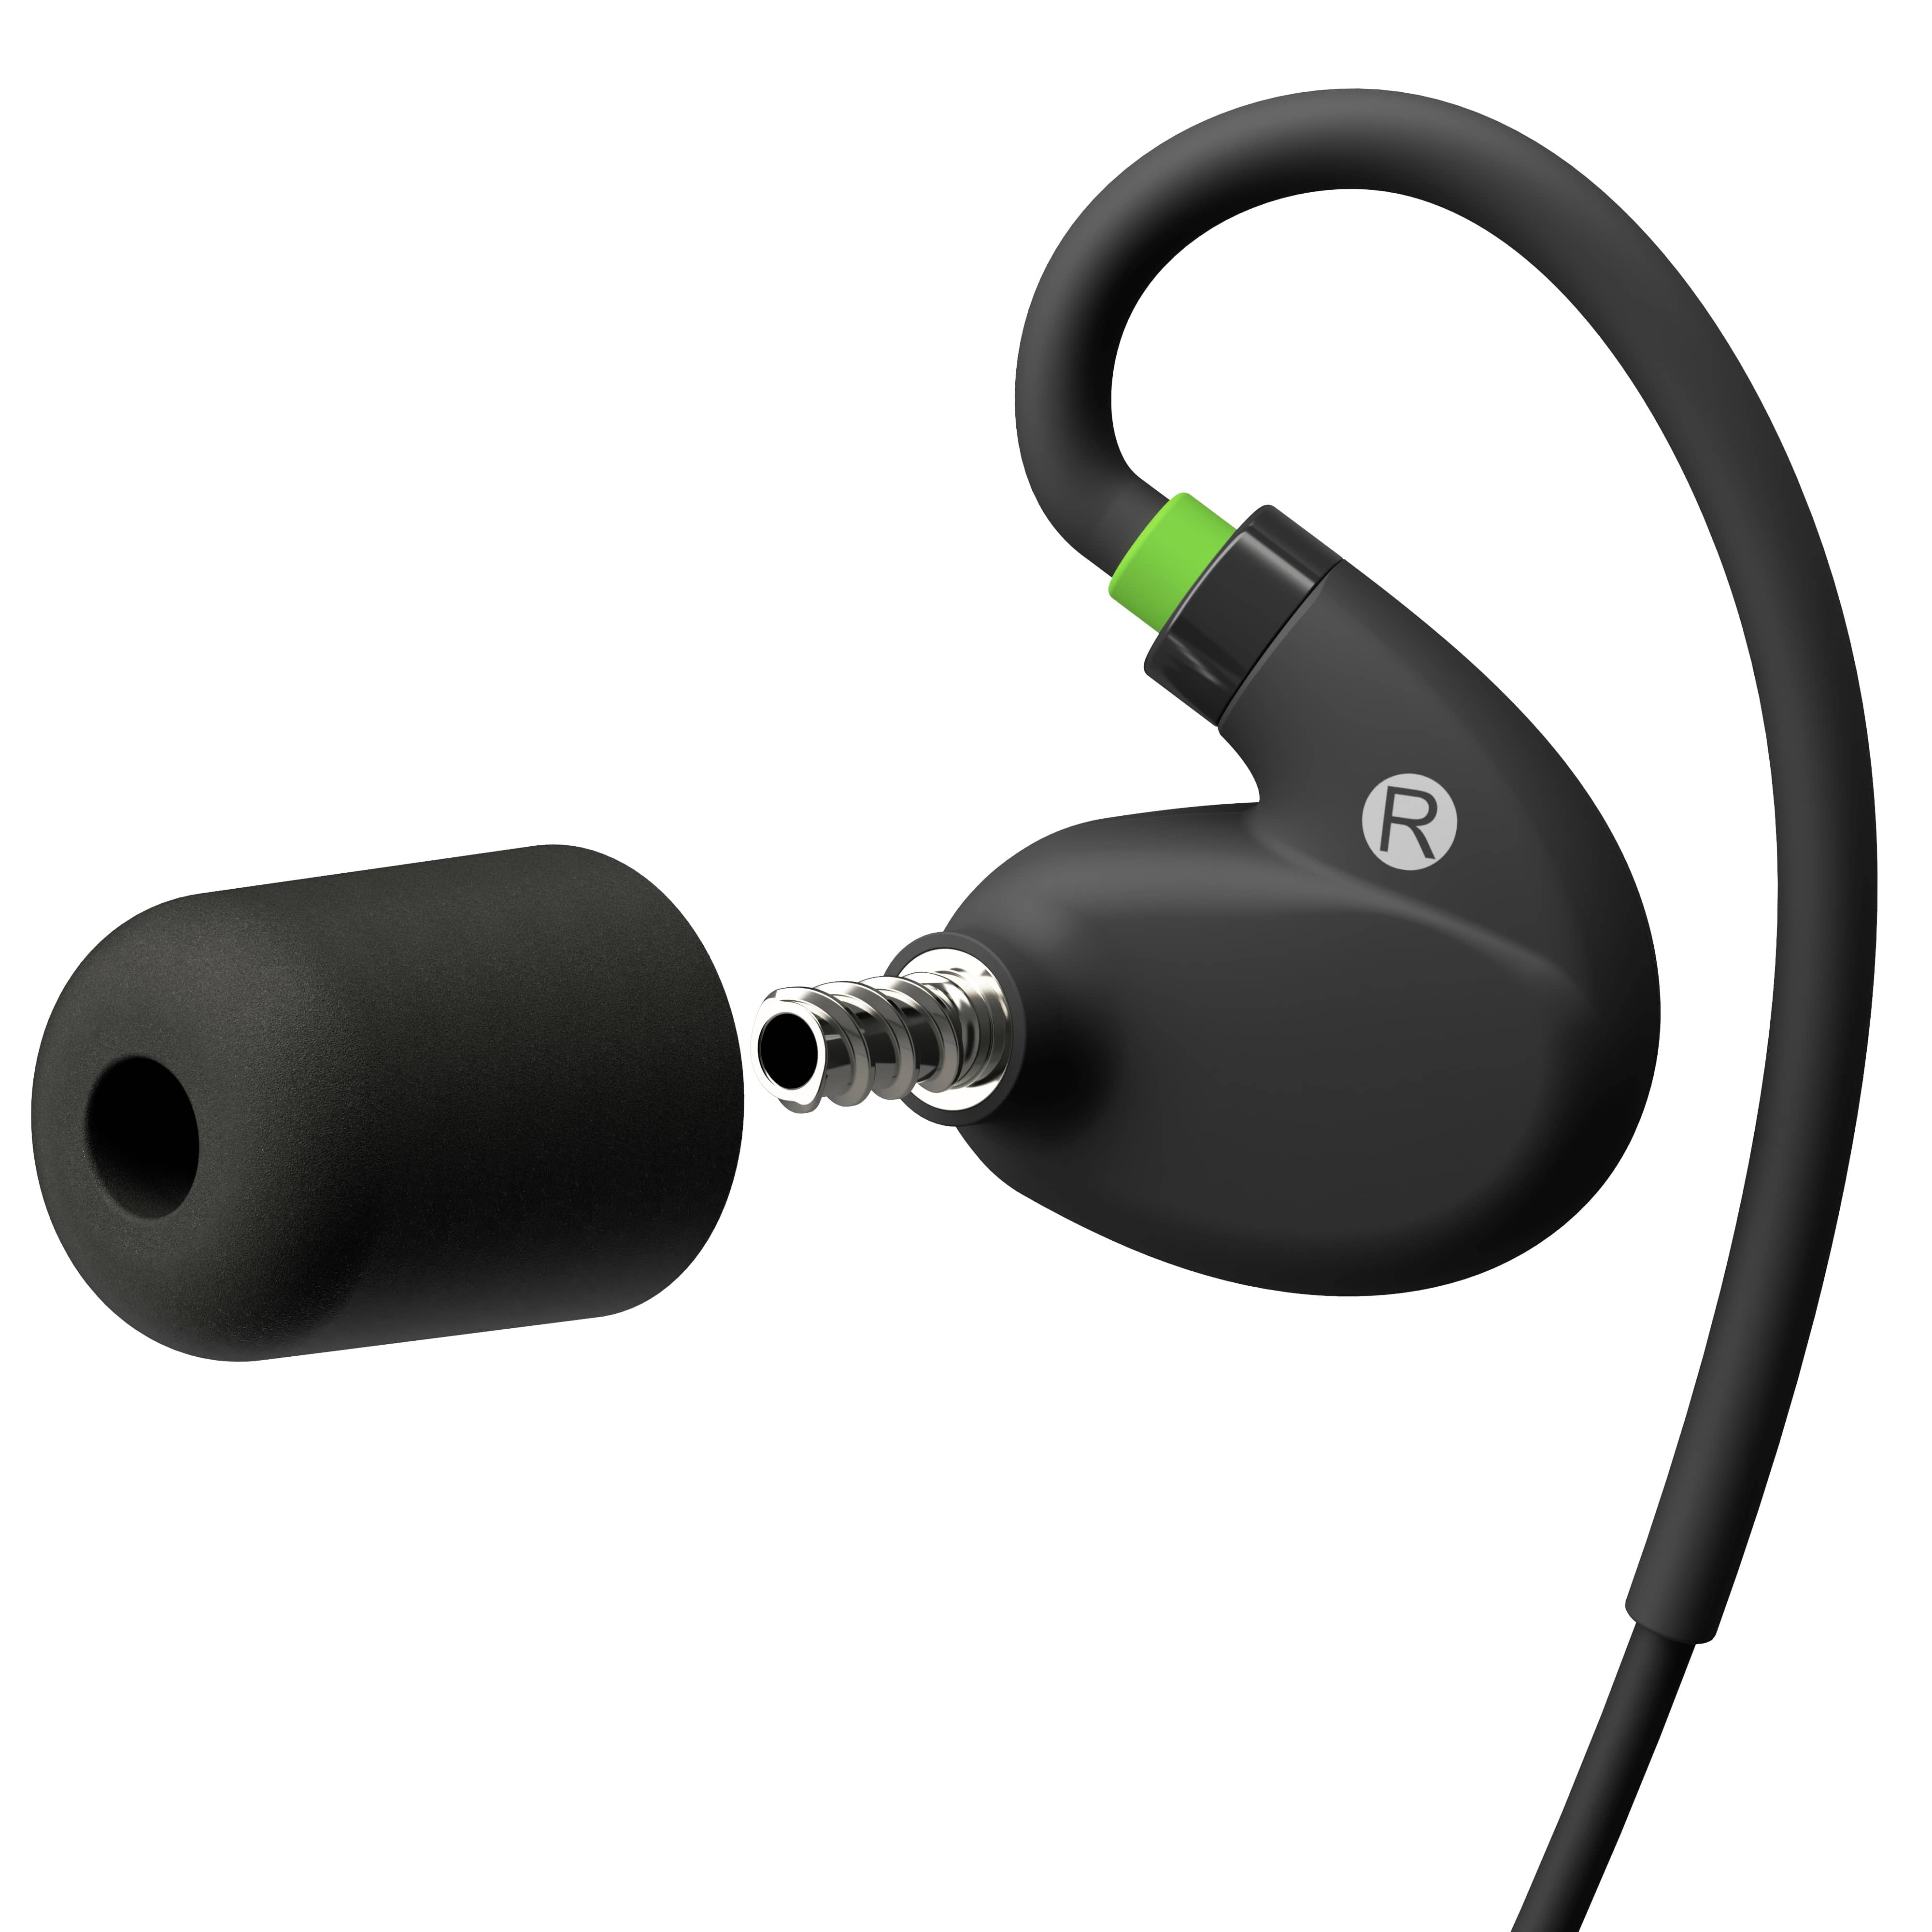 PRO 2.0 Industrial Listen Only Certified Refurbished